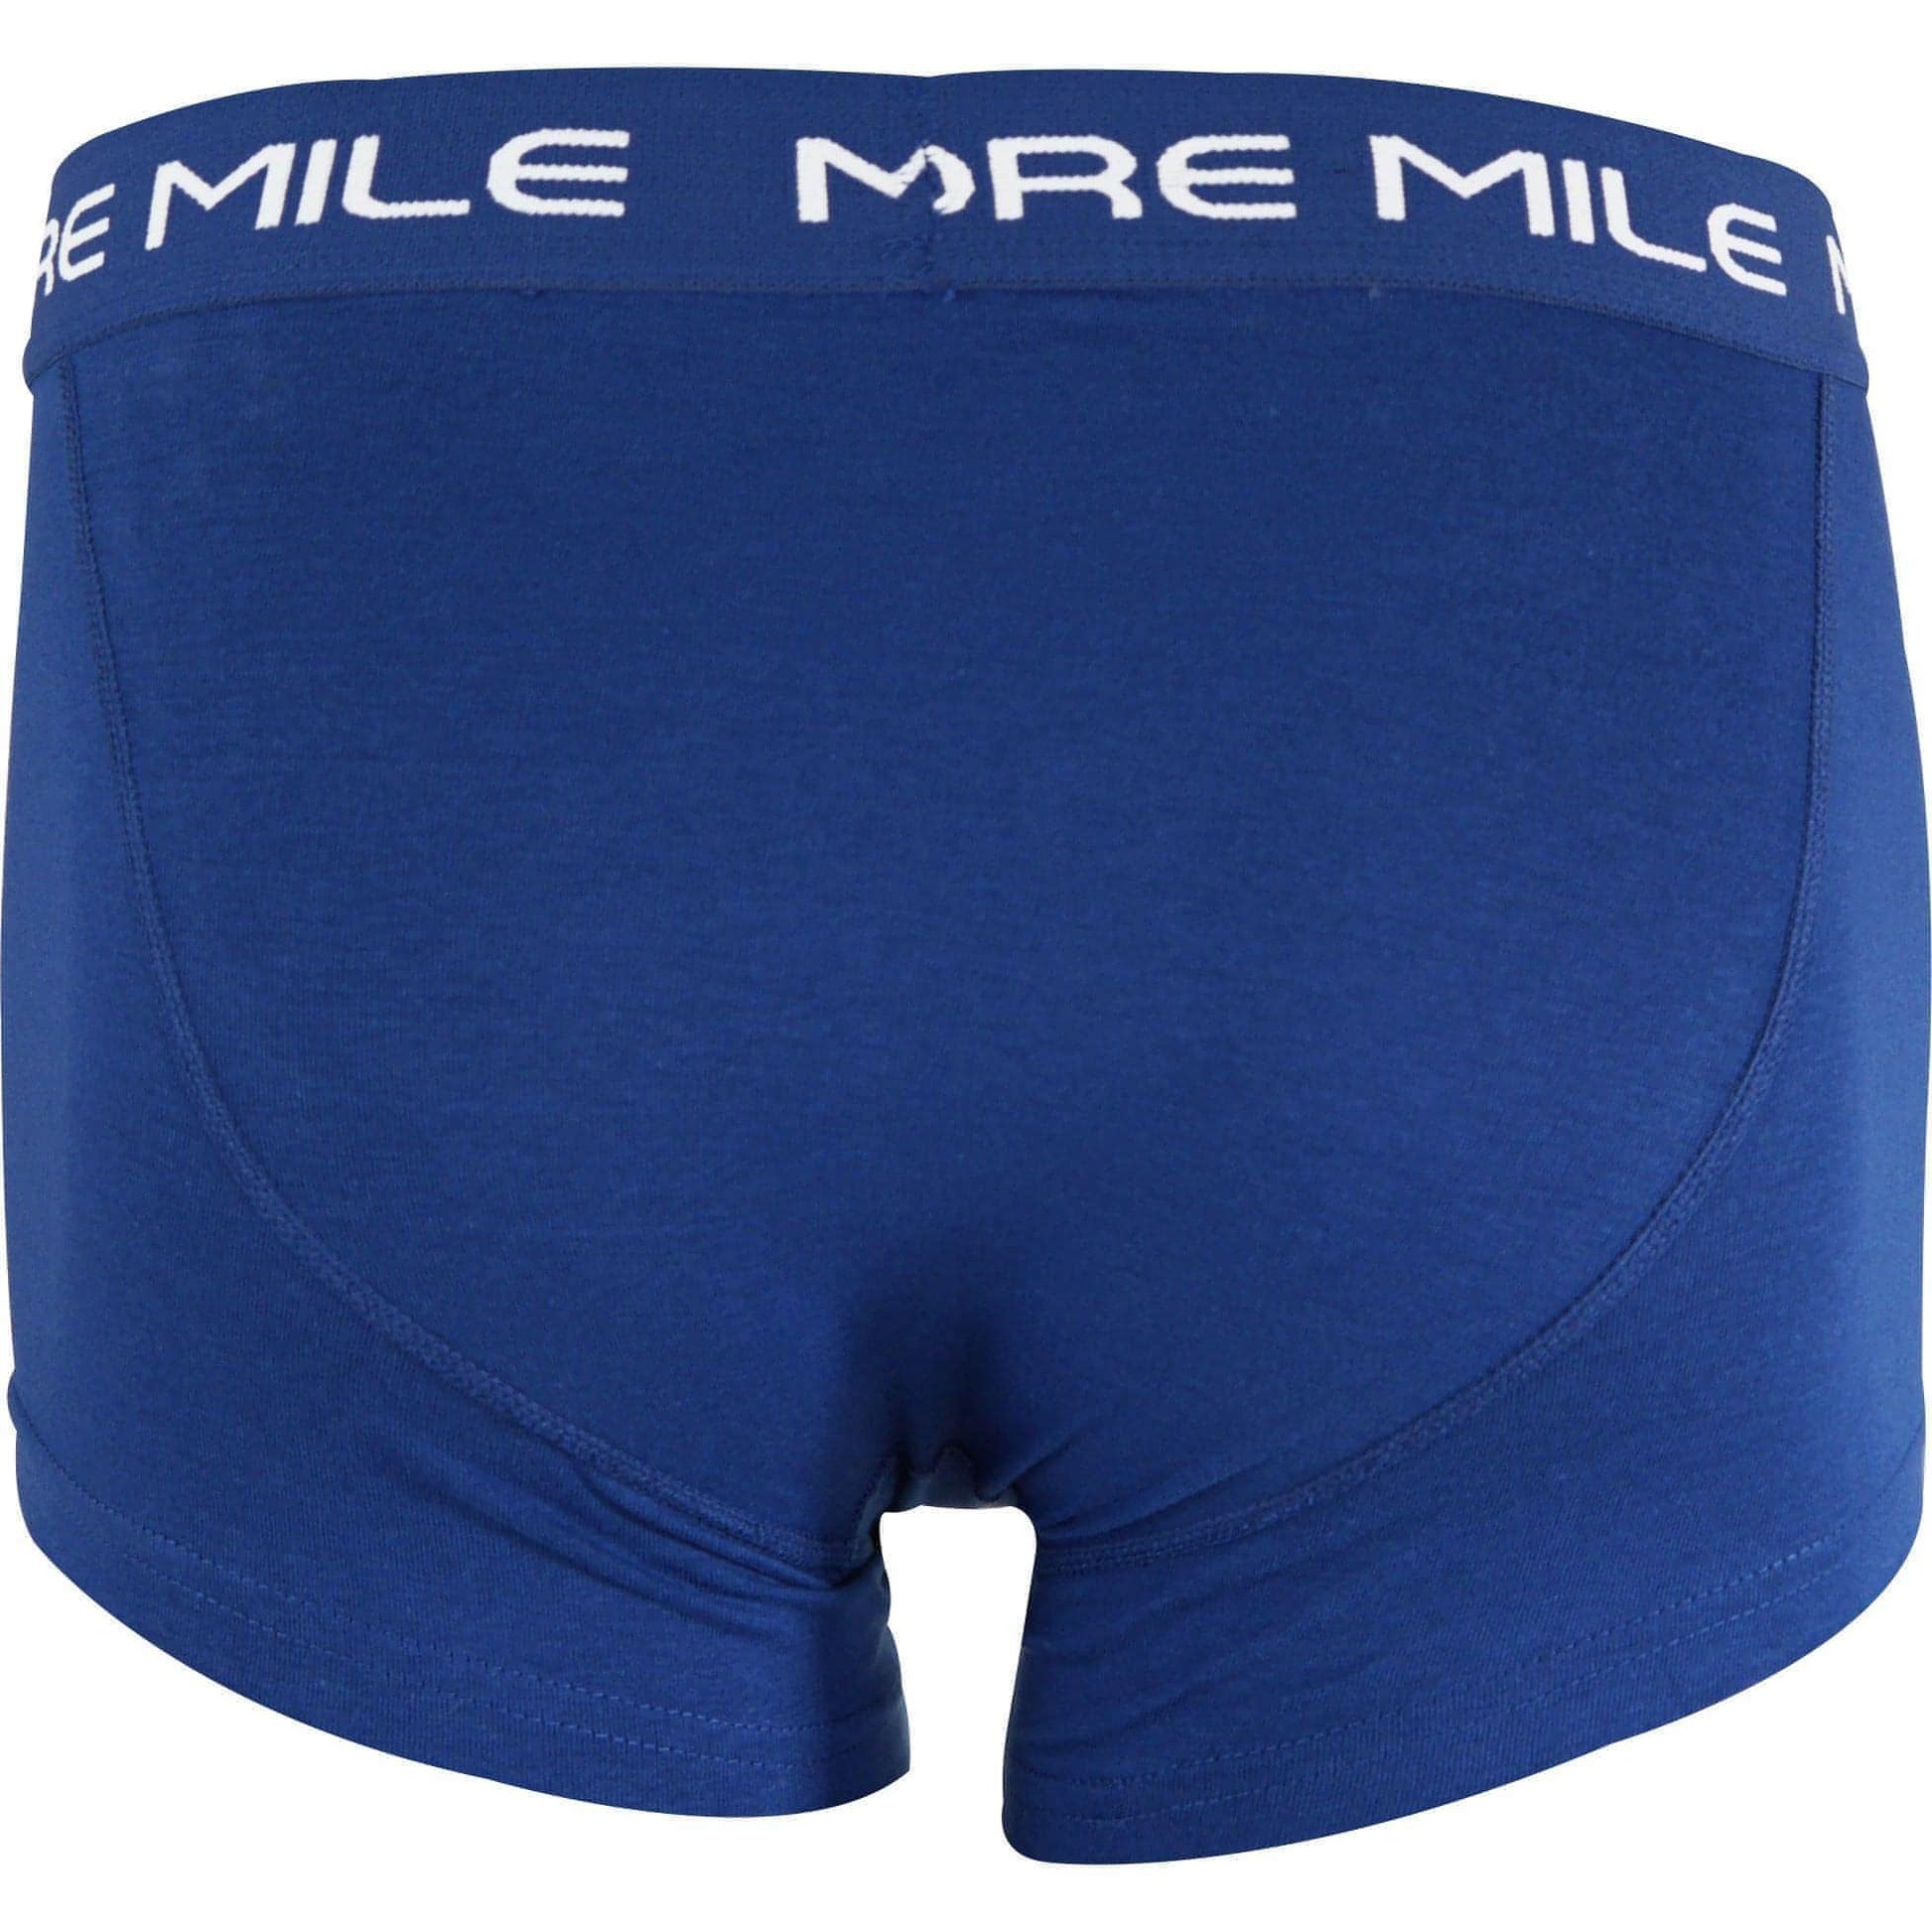 More Mile Pack Boxer 1P204881Wn Bluegrey Limogesblue Back View